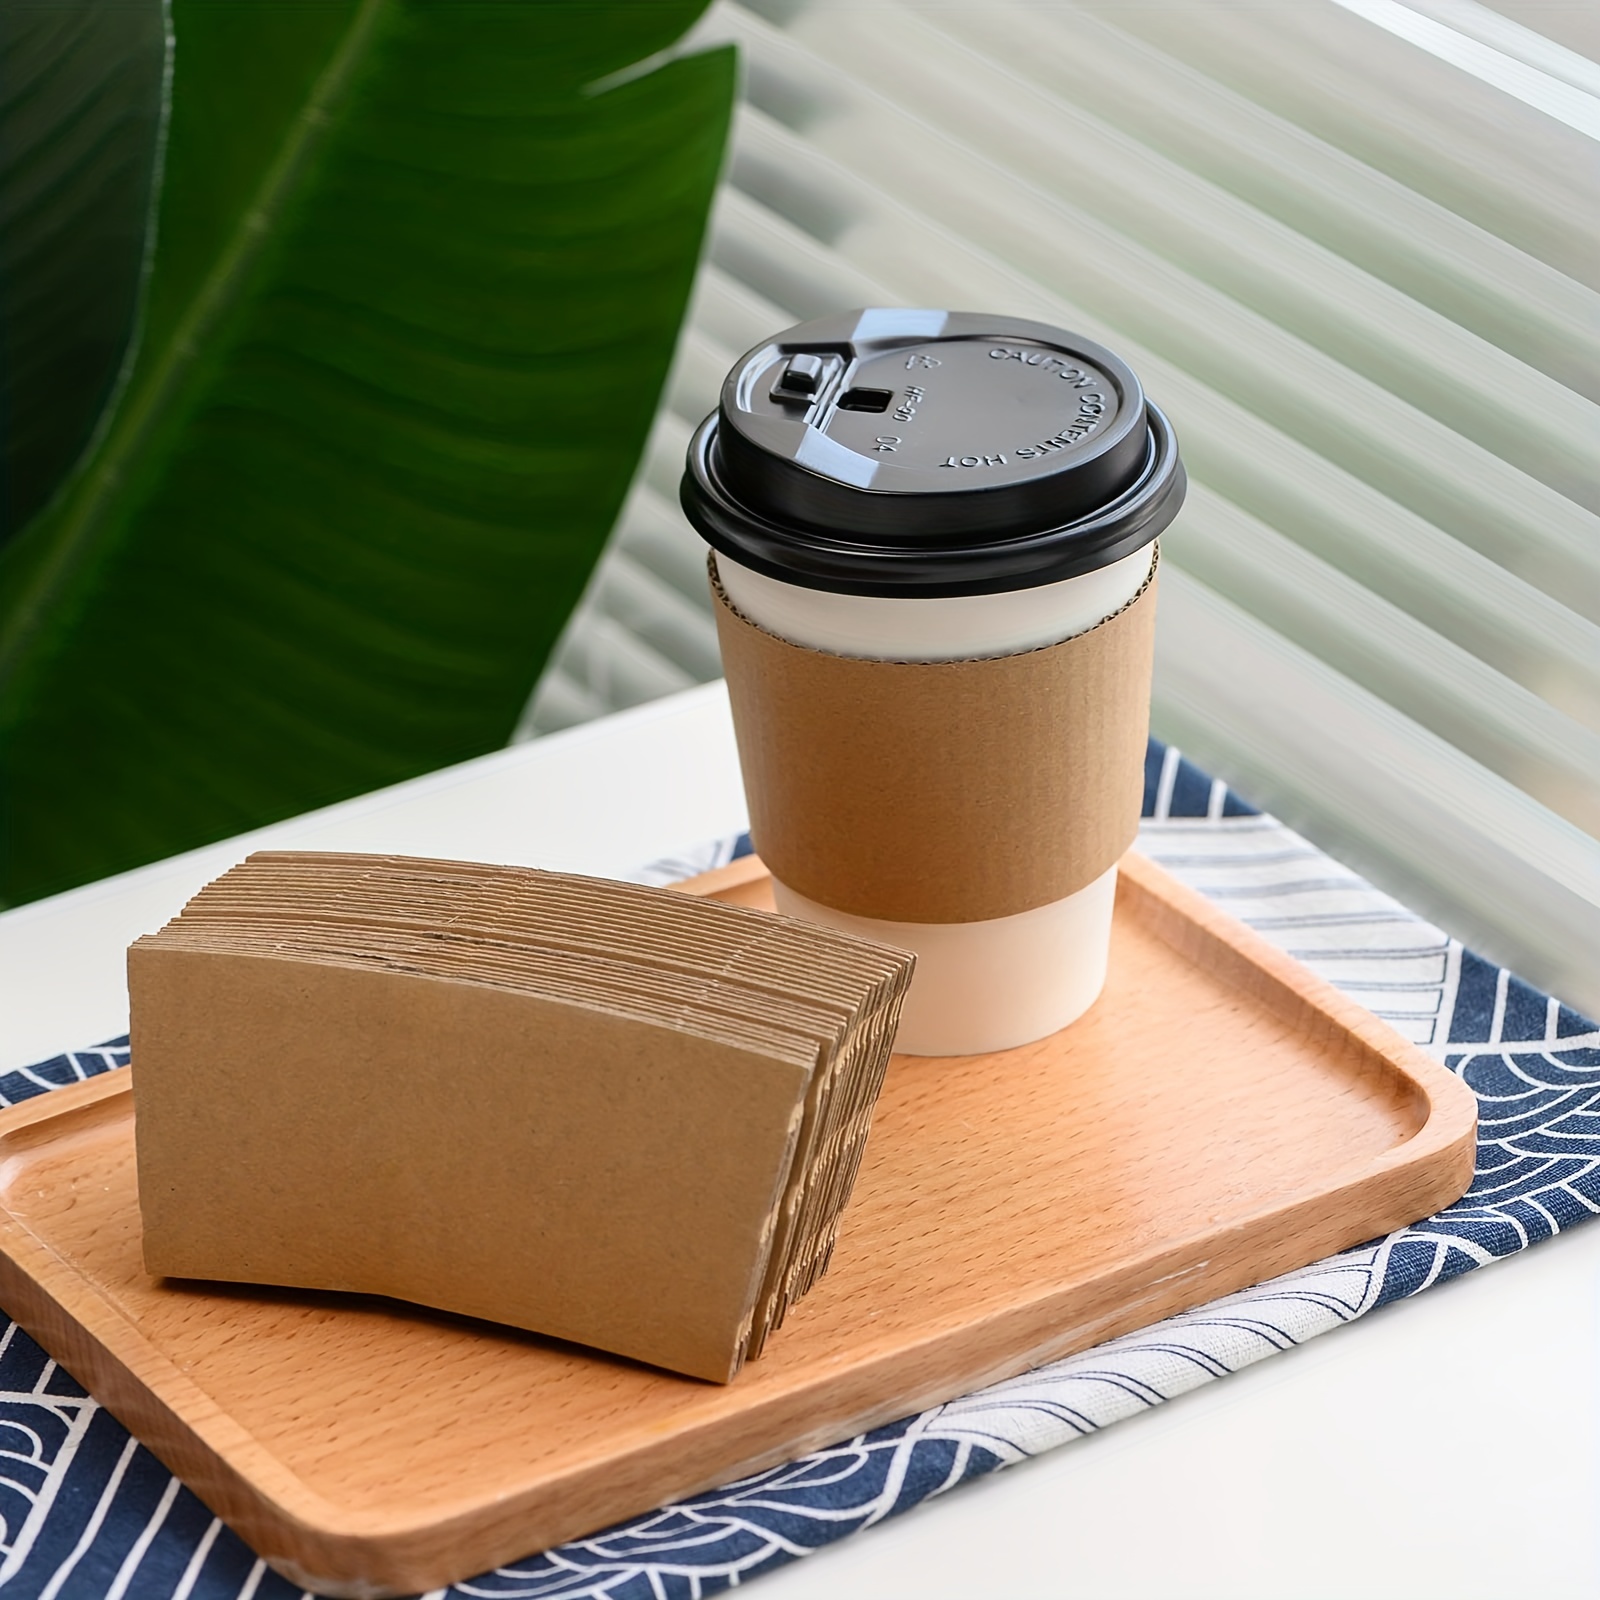 Avant Grub 50pk 12oz Disposable Coffee Cup Set with Sleeves, Lids, and Stirrers. Recyclable, Decorative and Stylish Brown Paper Cup